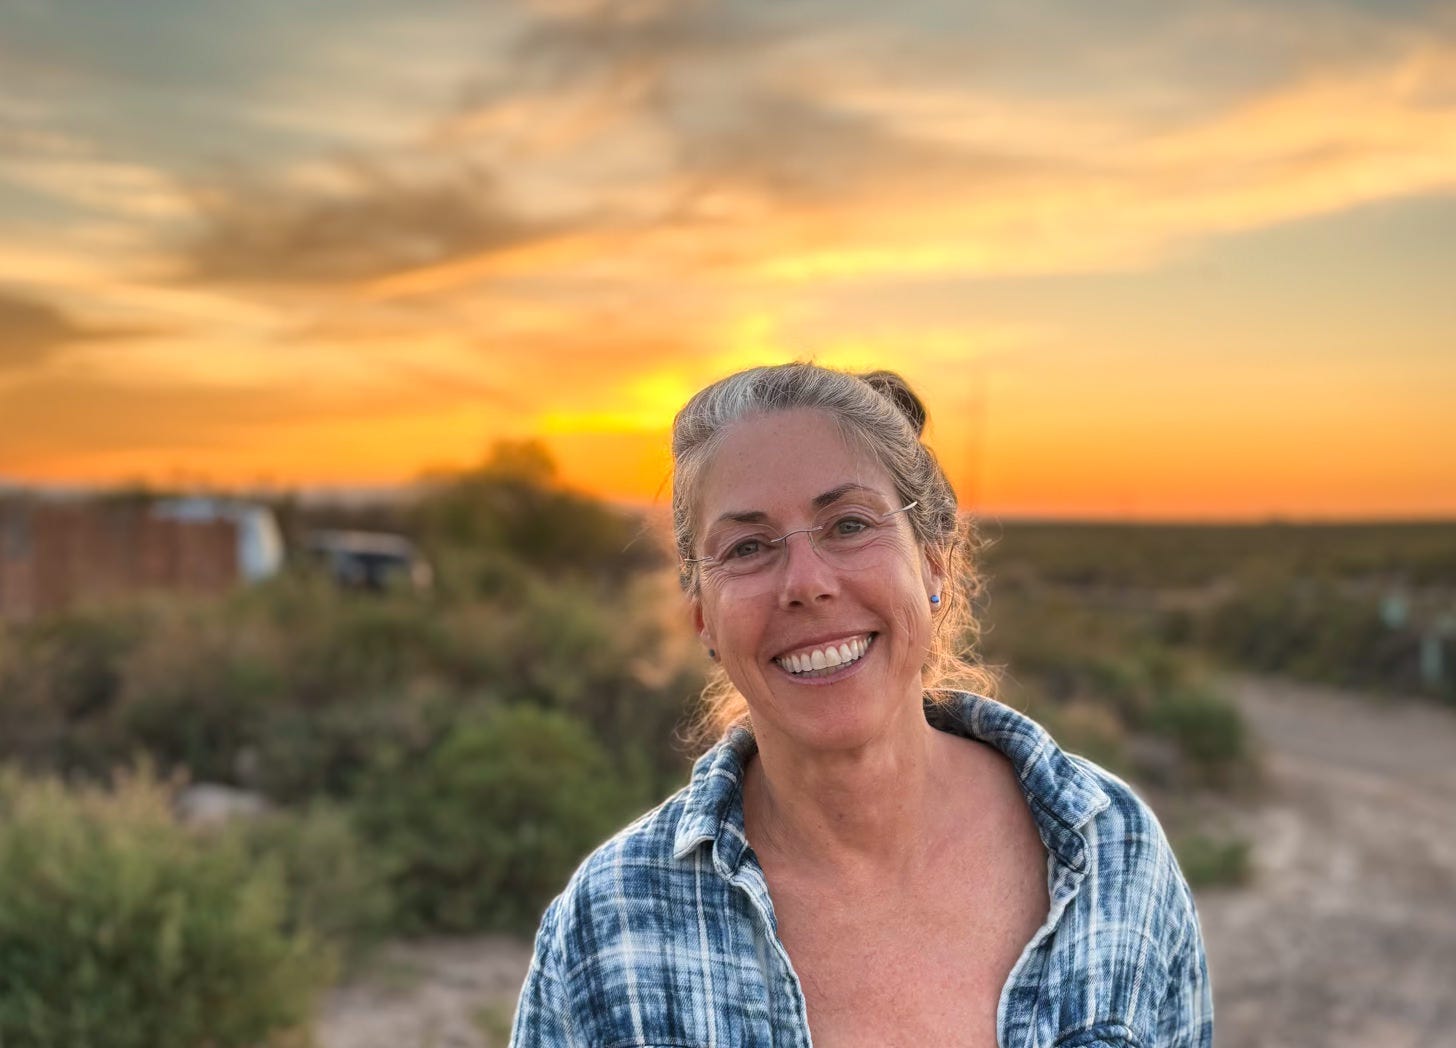 smiling woman shown from chest up in plaid shirt against background of orange sunset